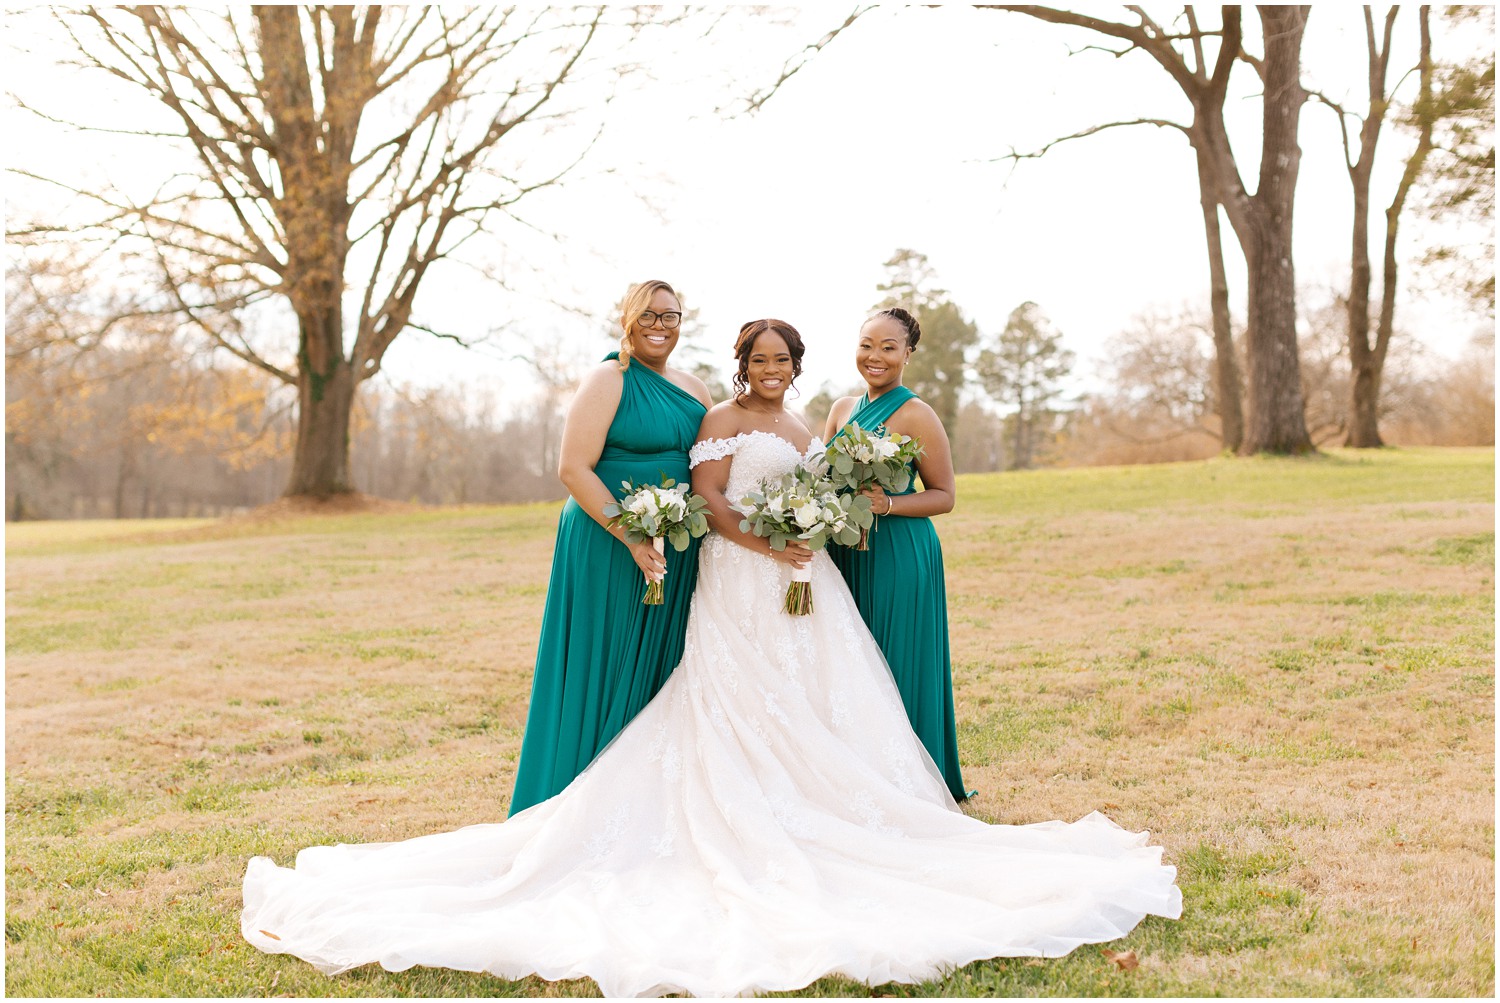 Bridesmaids in colorful gowns at The Barn at Valhalla.